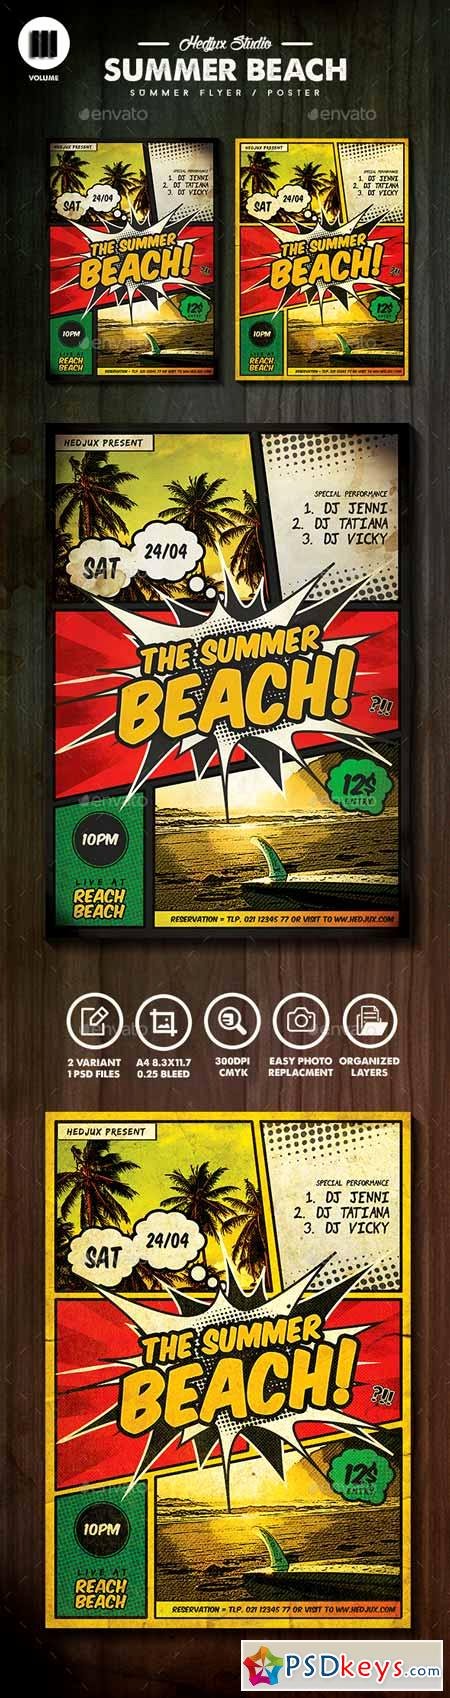 Comic Book Template Photoshop New the Summer Beach Ic Flyer Free Download